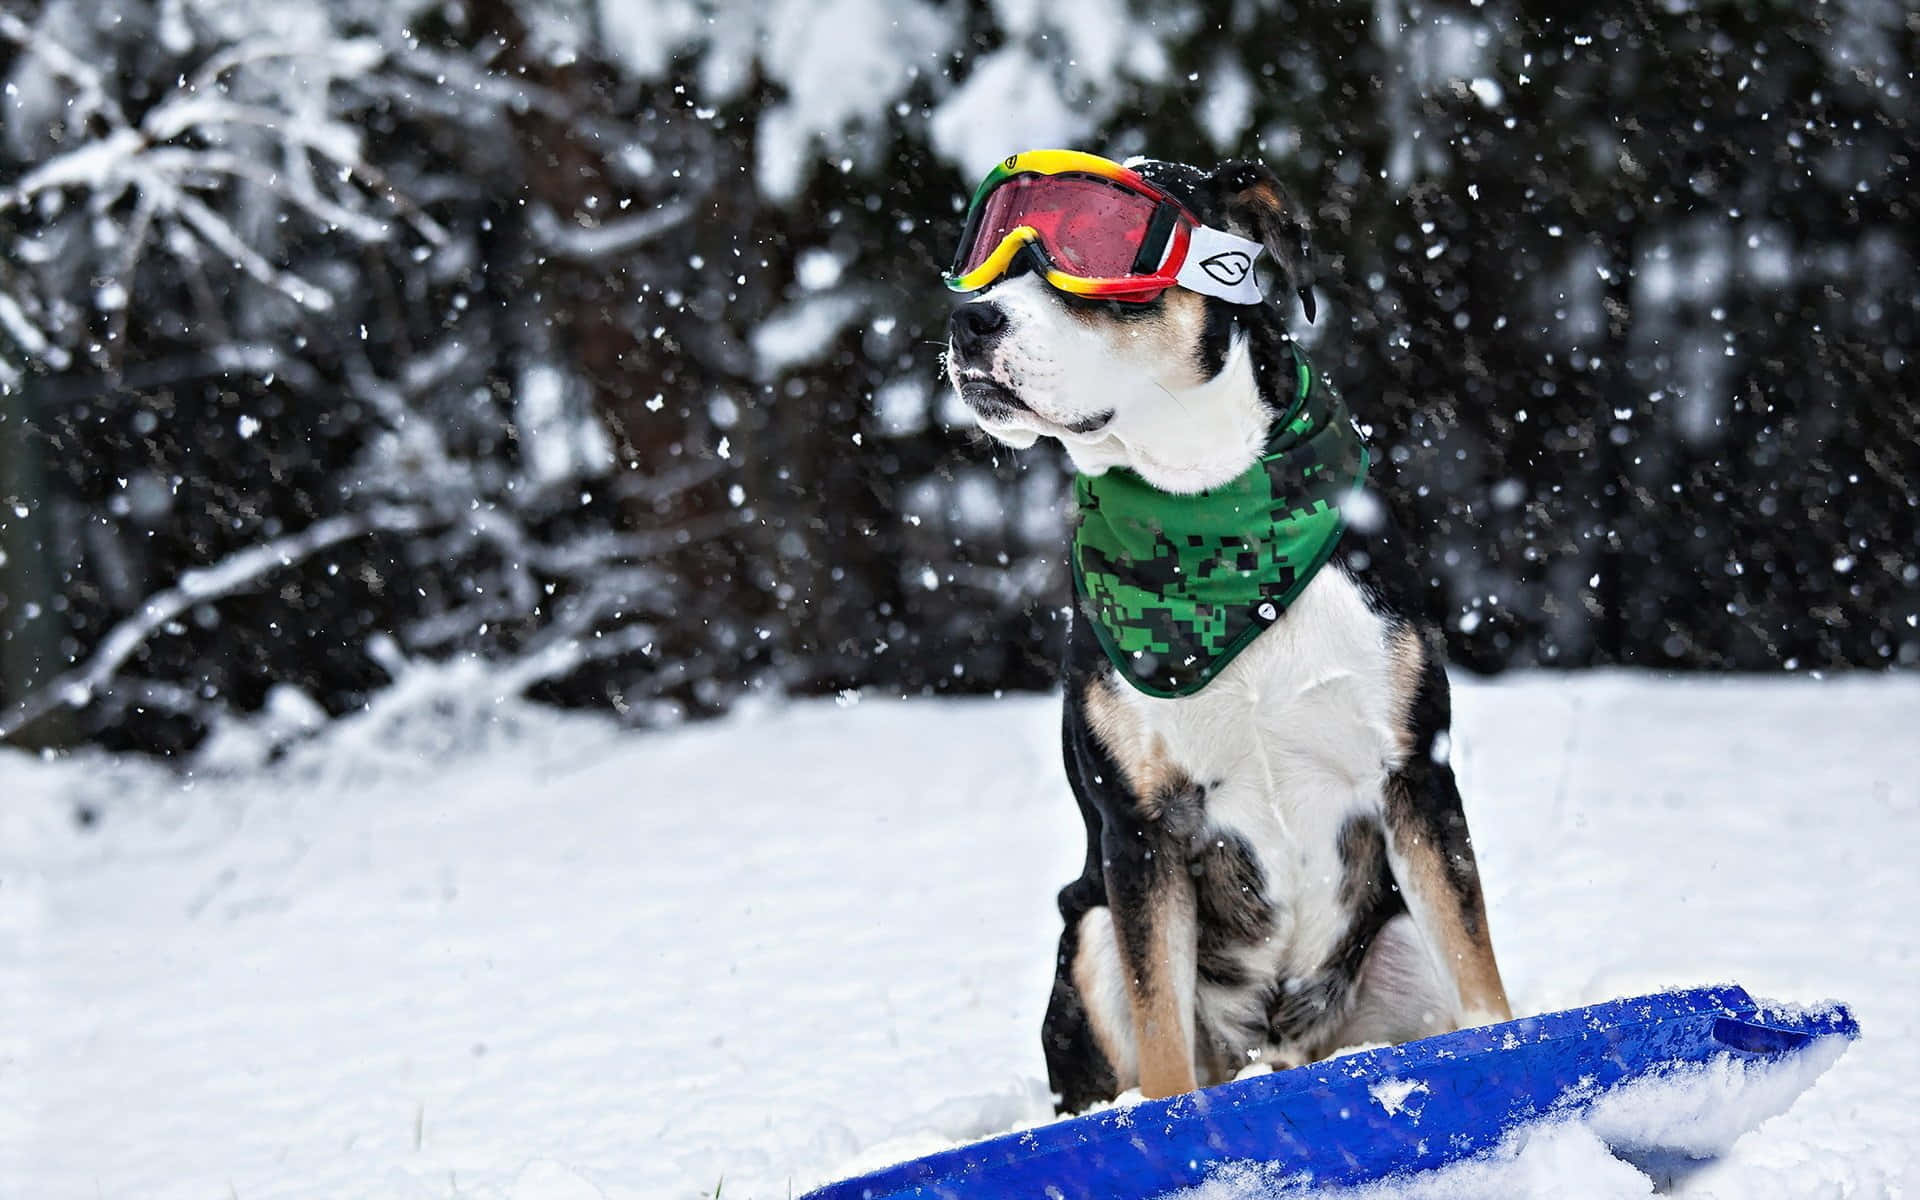 Funny Snow Snowboarding Dog Picture